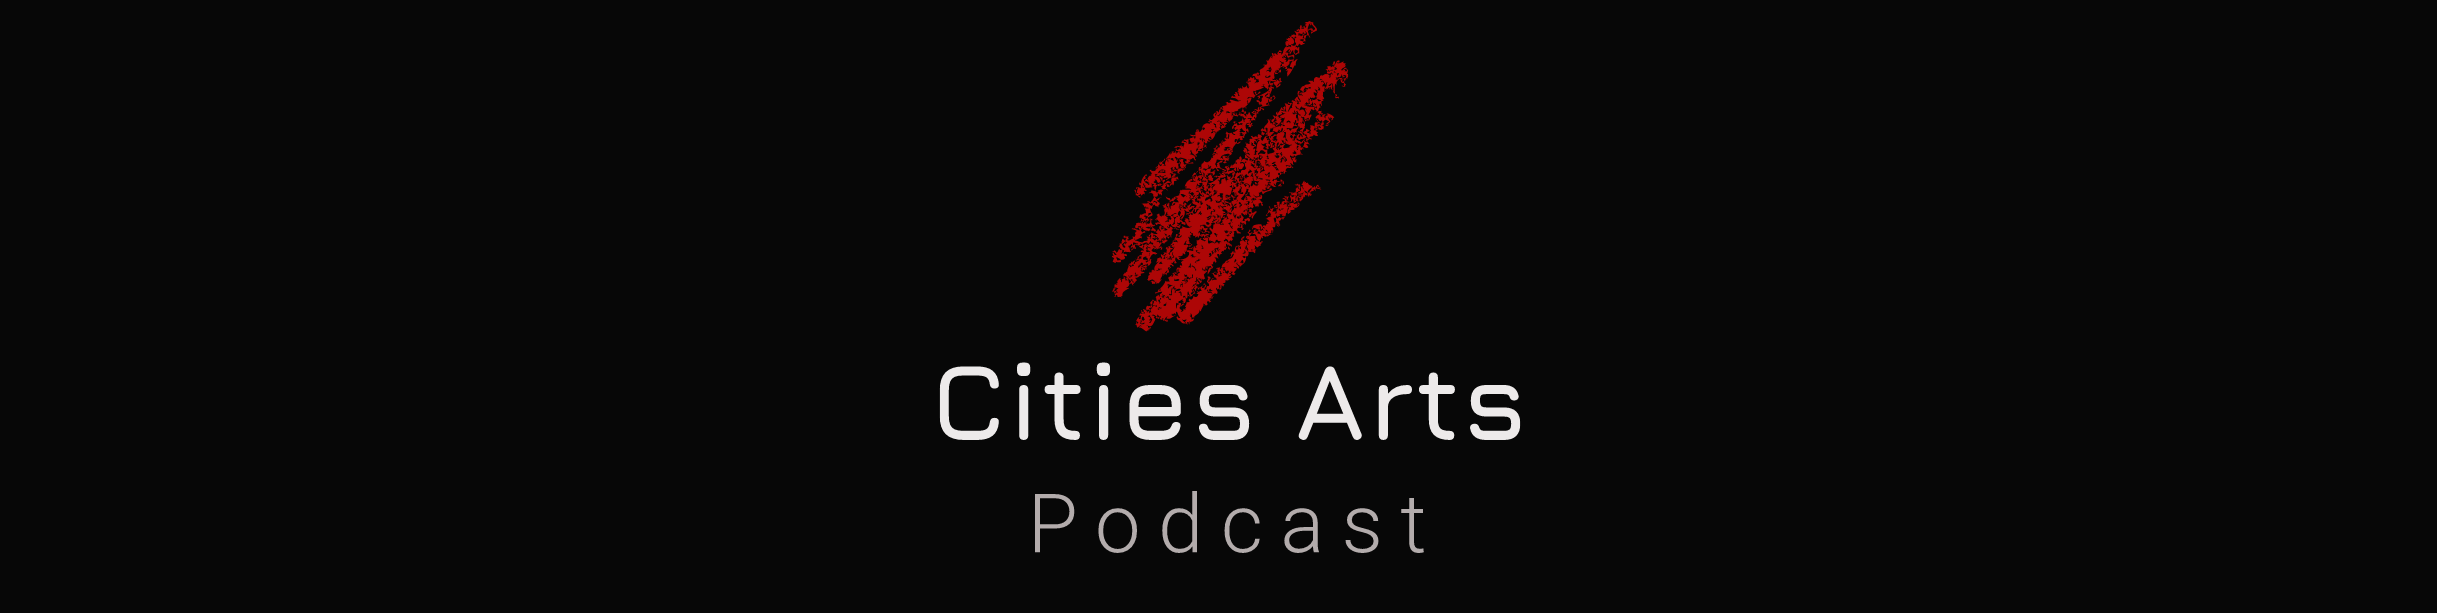 The Cities Arts Podcast